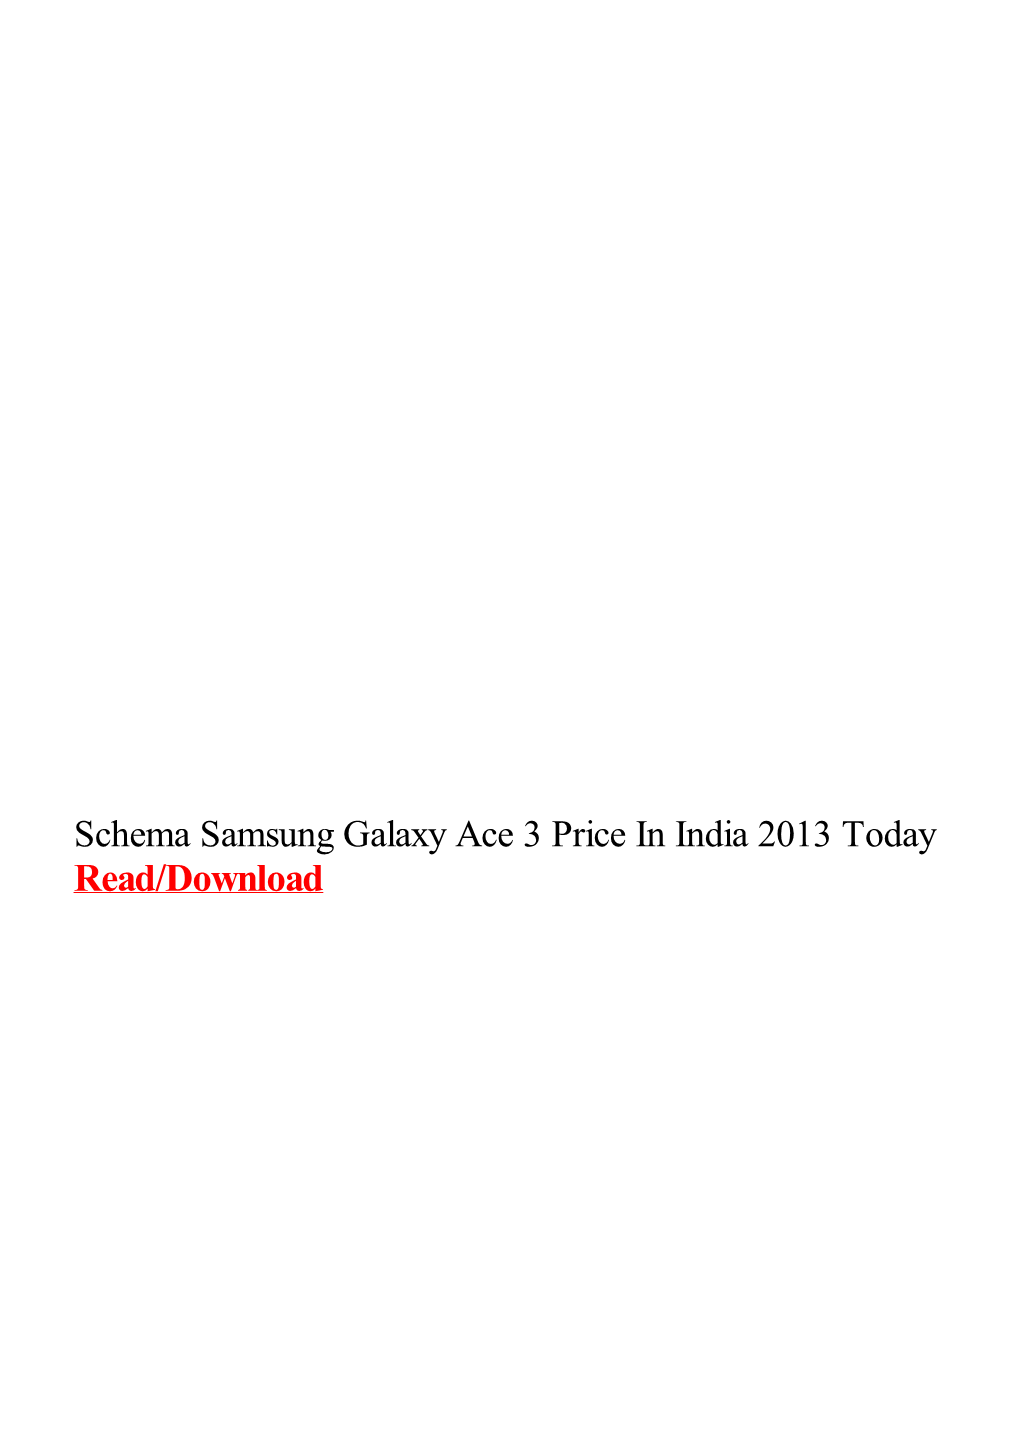 Schema Samsung Galaxy Ace 3 Price in India 2013 Today